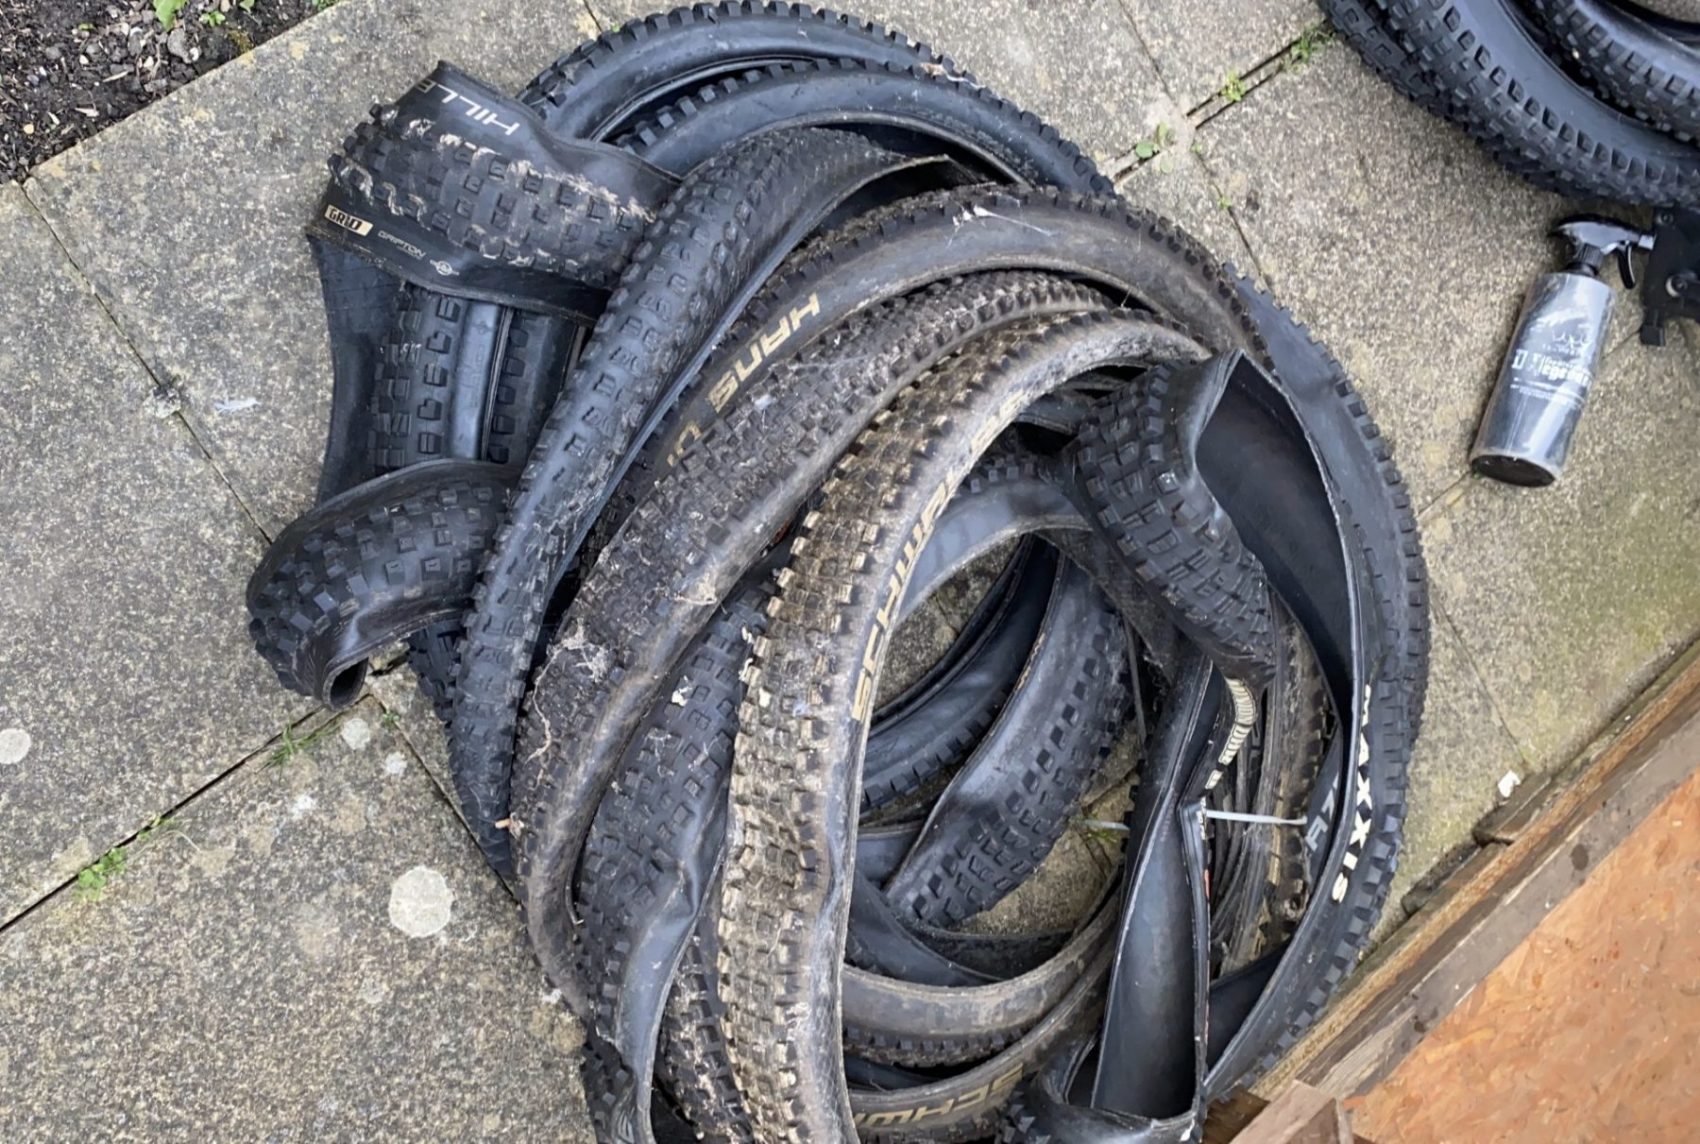 UK Plans To Make Scrapping Bike Tyres Illegal